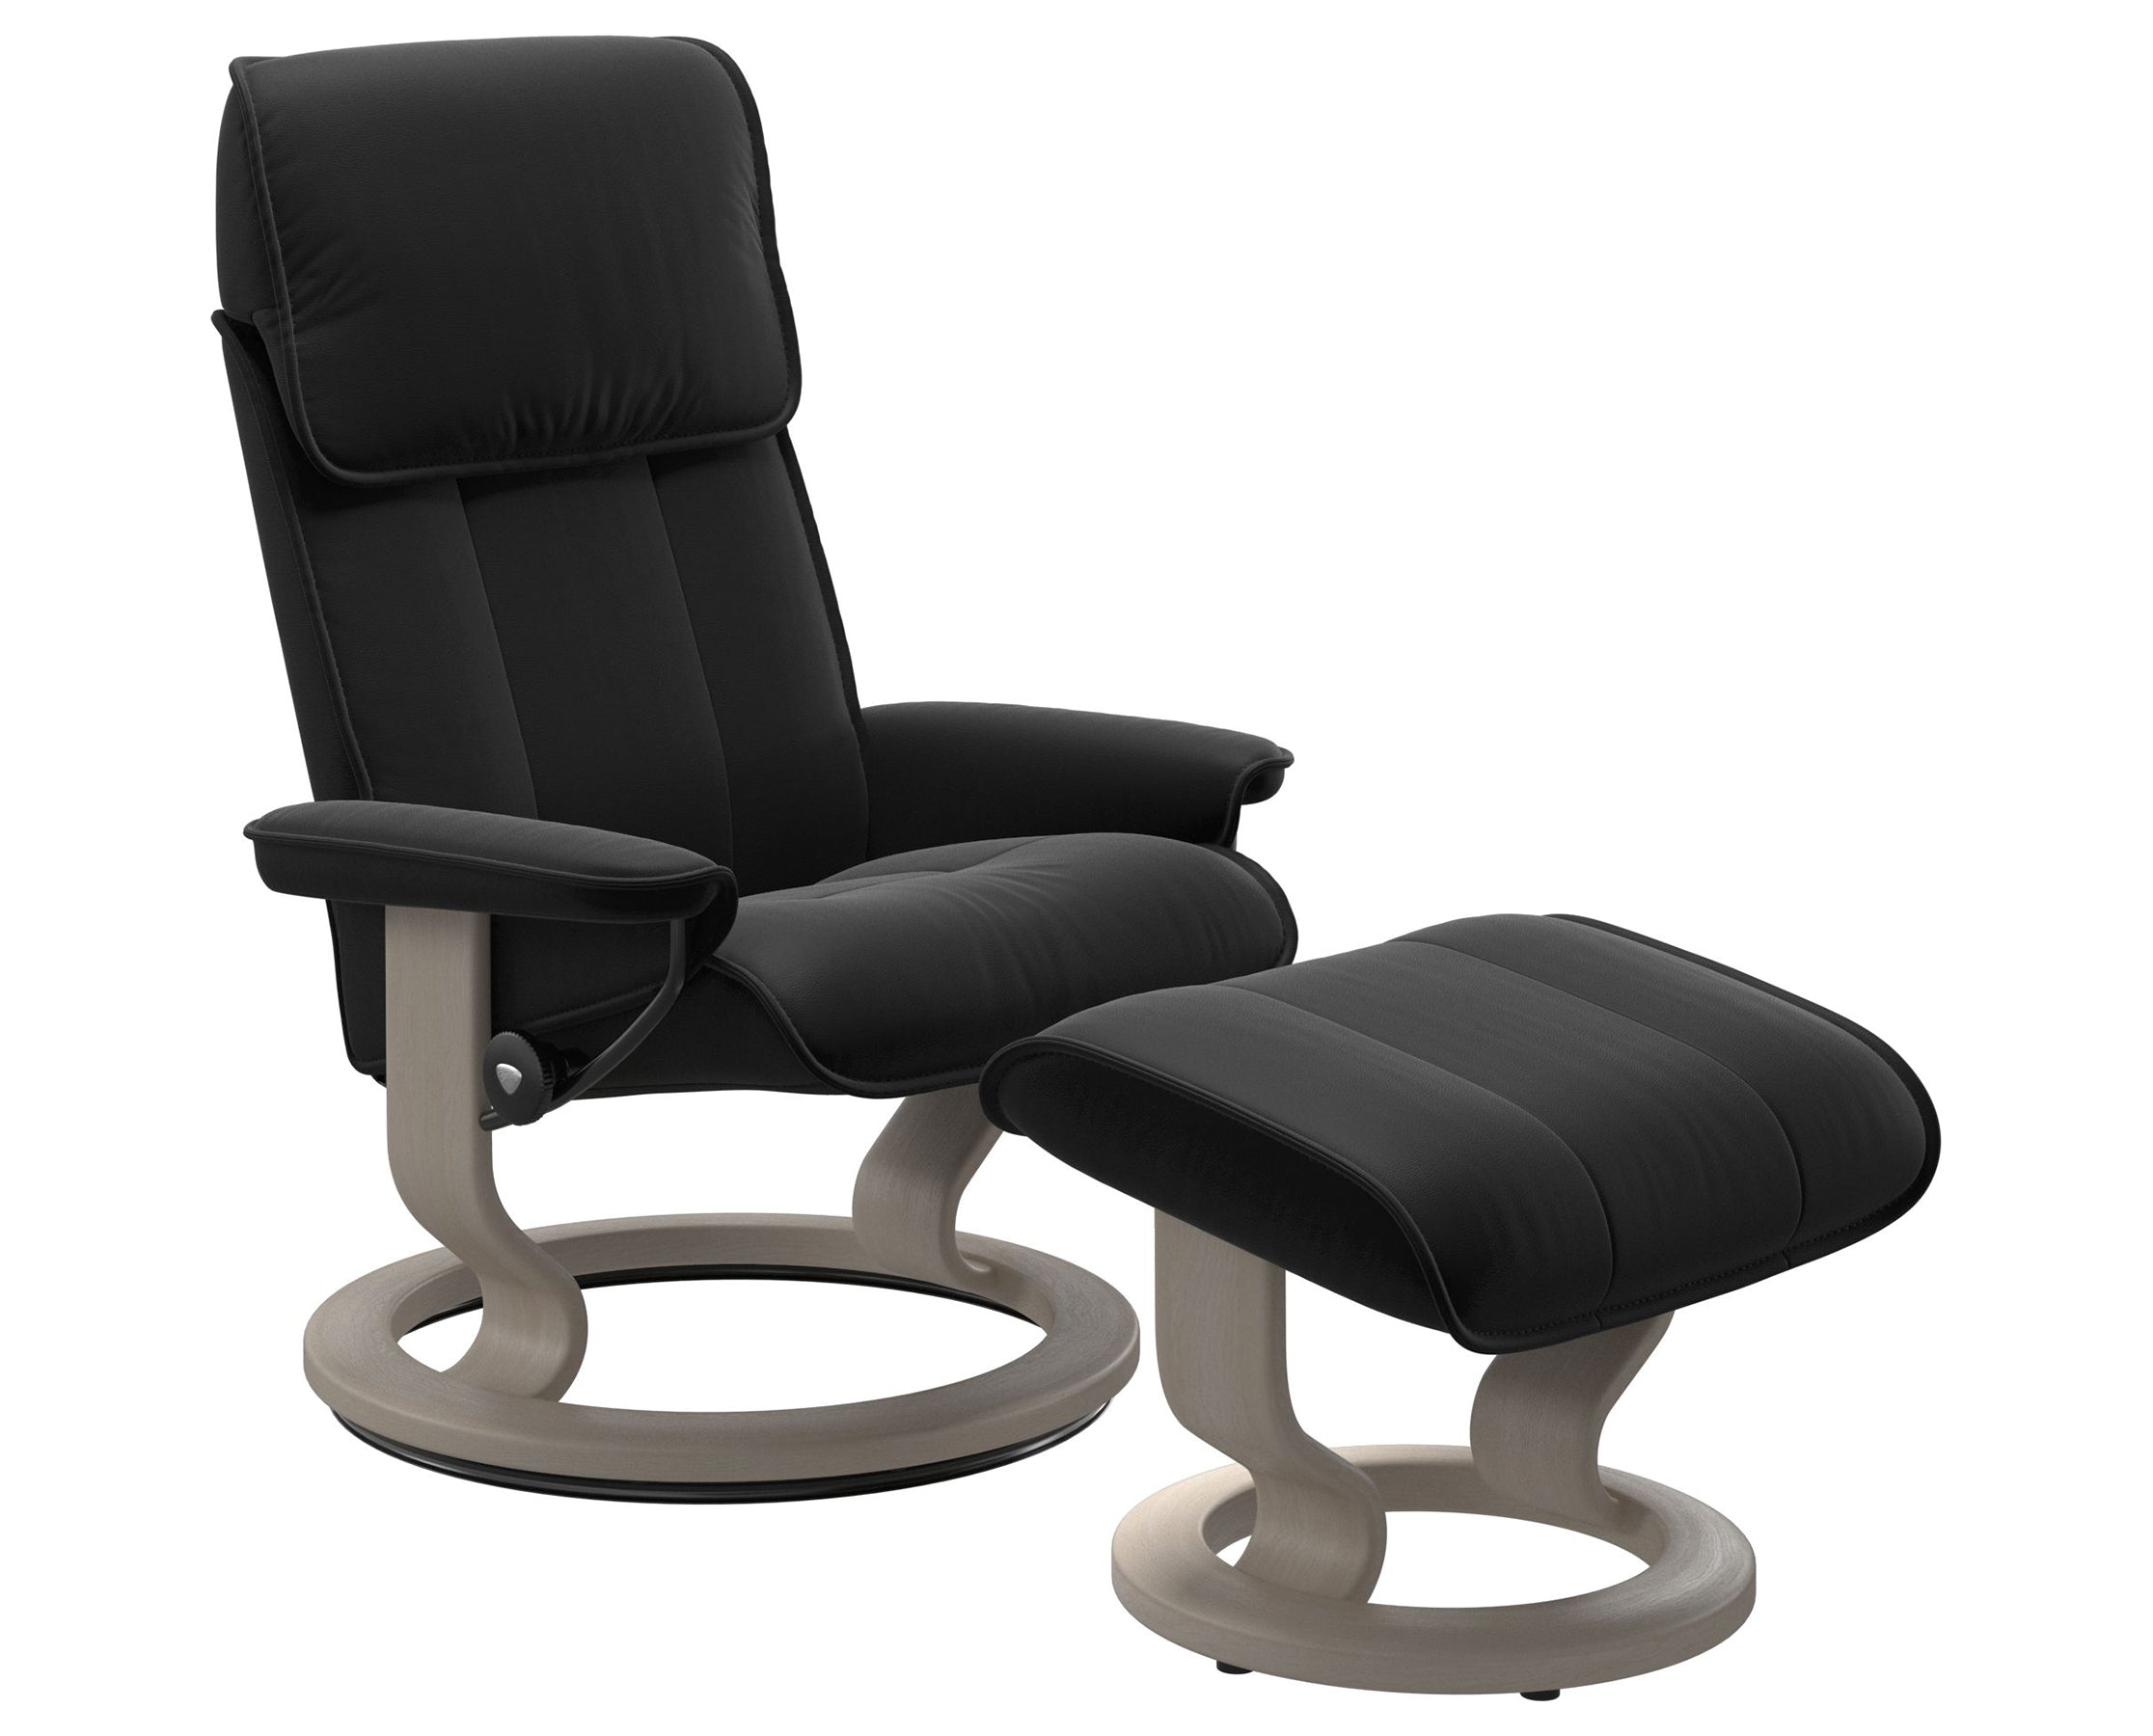 Paloma Leather Black M/L and Whitewash Base | Stressless Admiral Classic Recliner | Valley Ridge Furniture